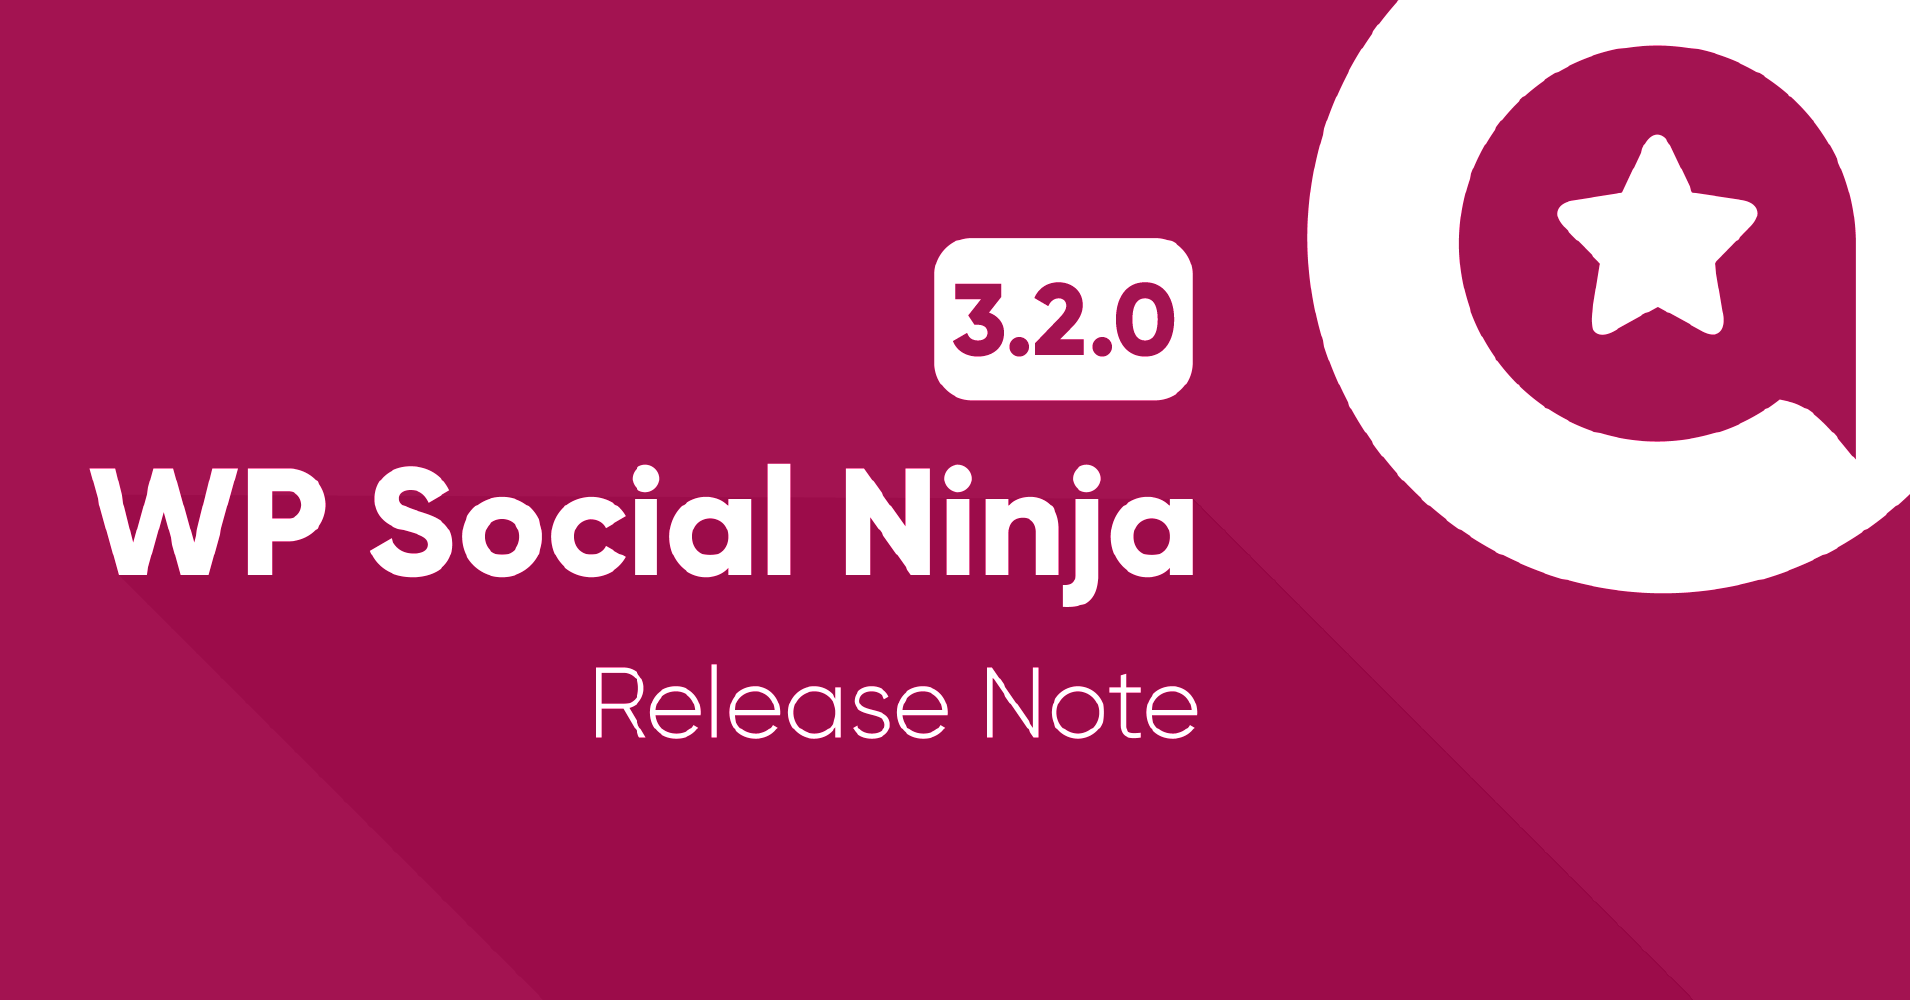 What’s in Store on WP Social Ninja 3.2.0